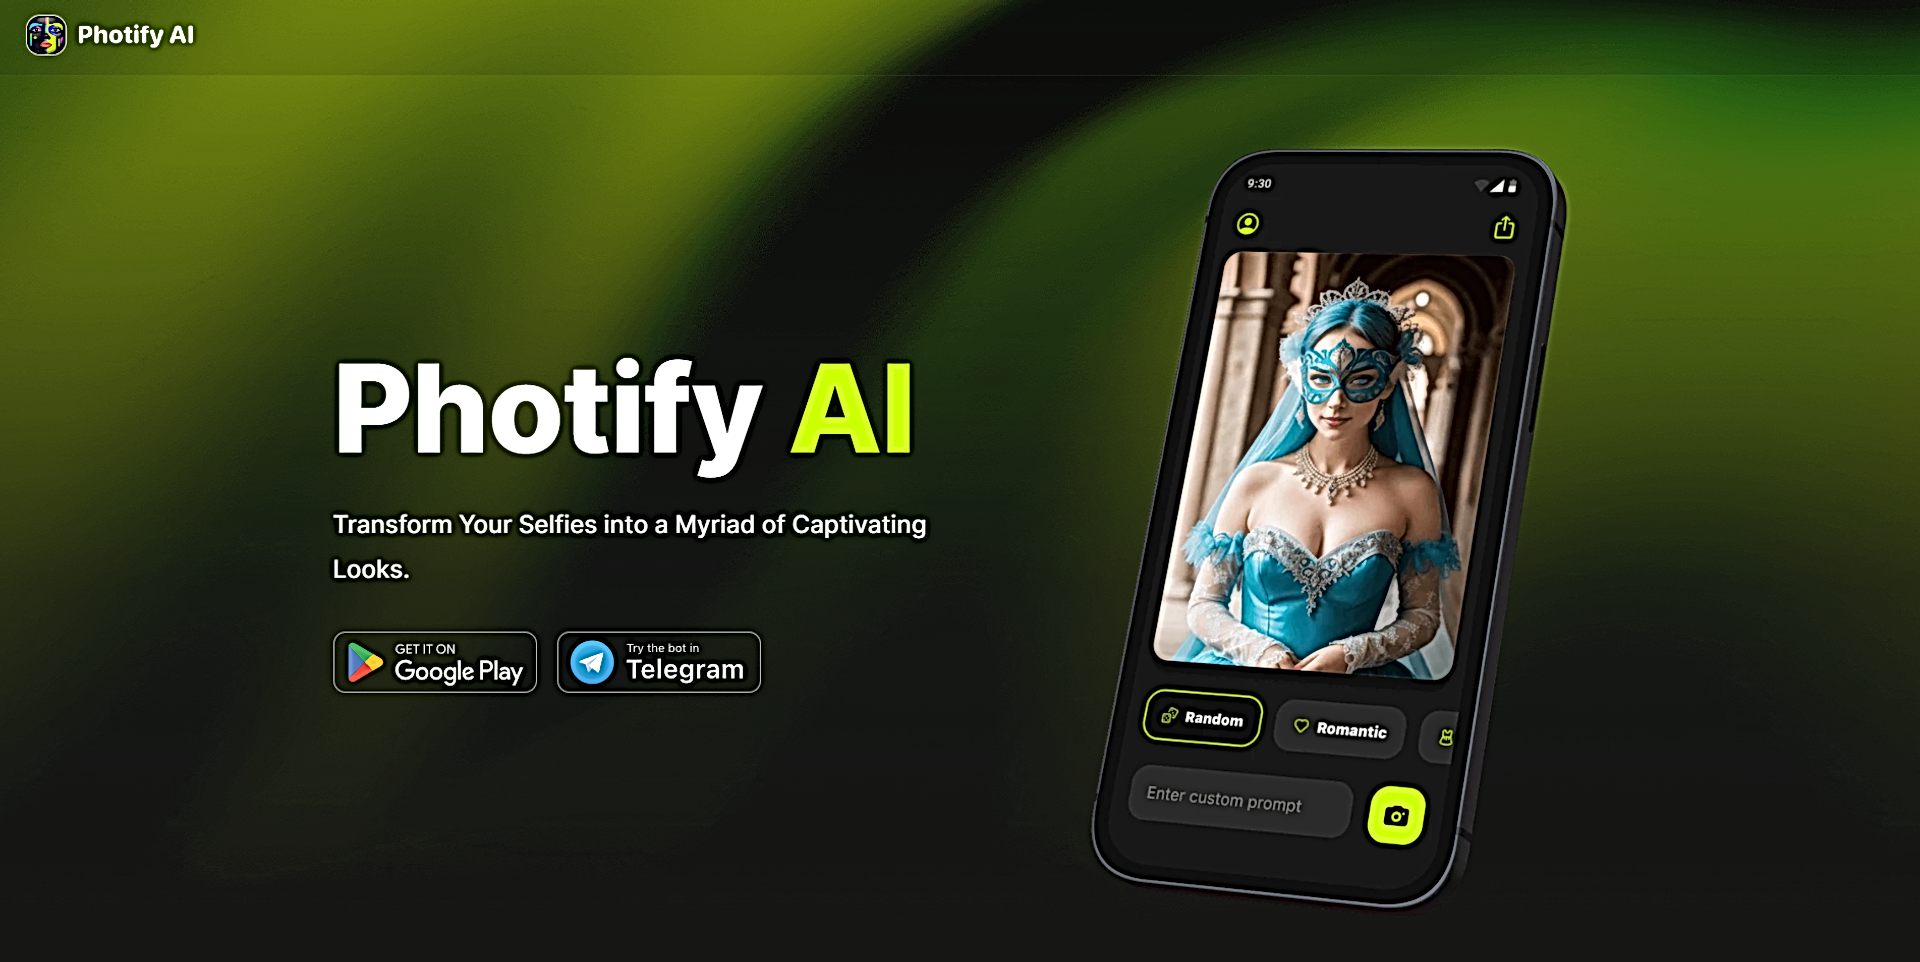 Photify AI featured